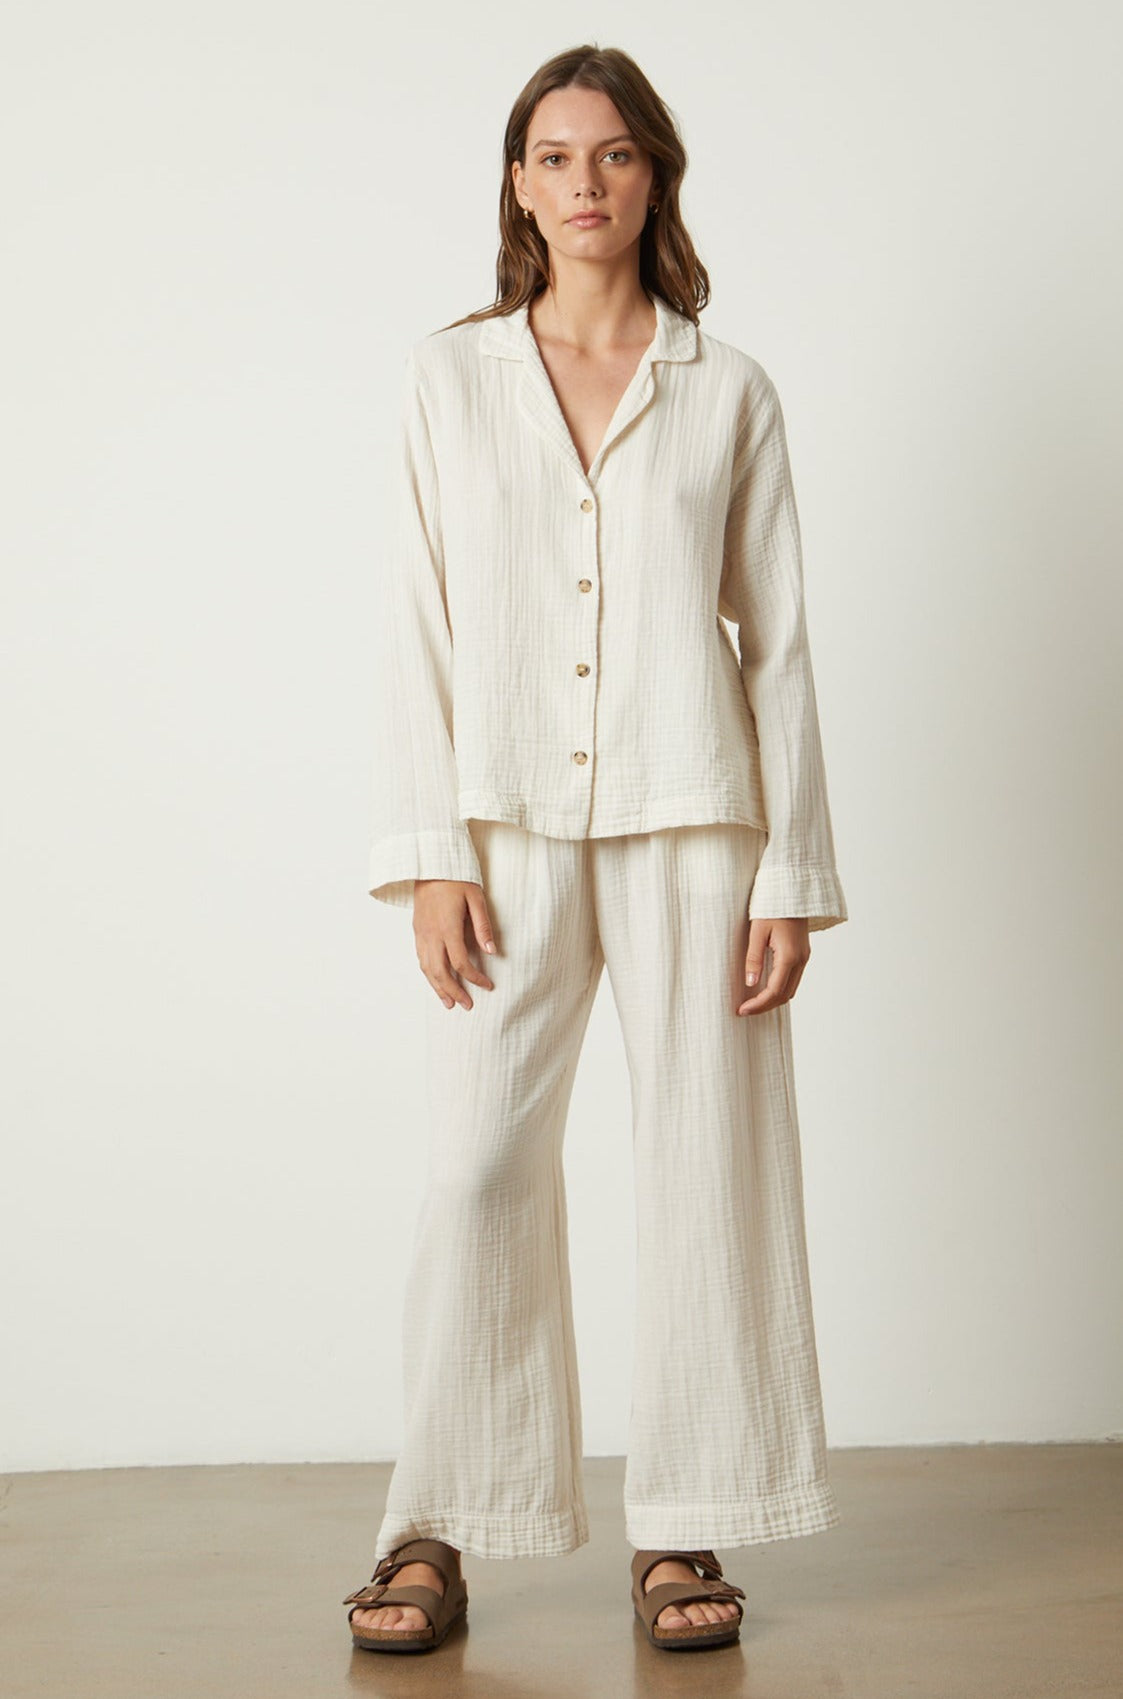 The model is wearing a white linen Jenny Graham Home pajama set.-25519563047105